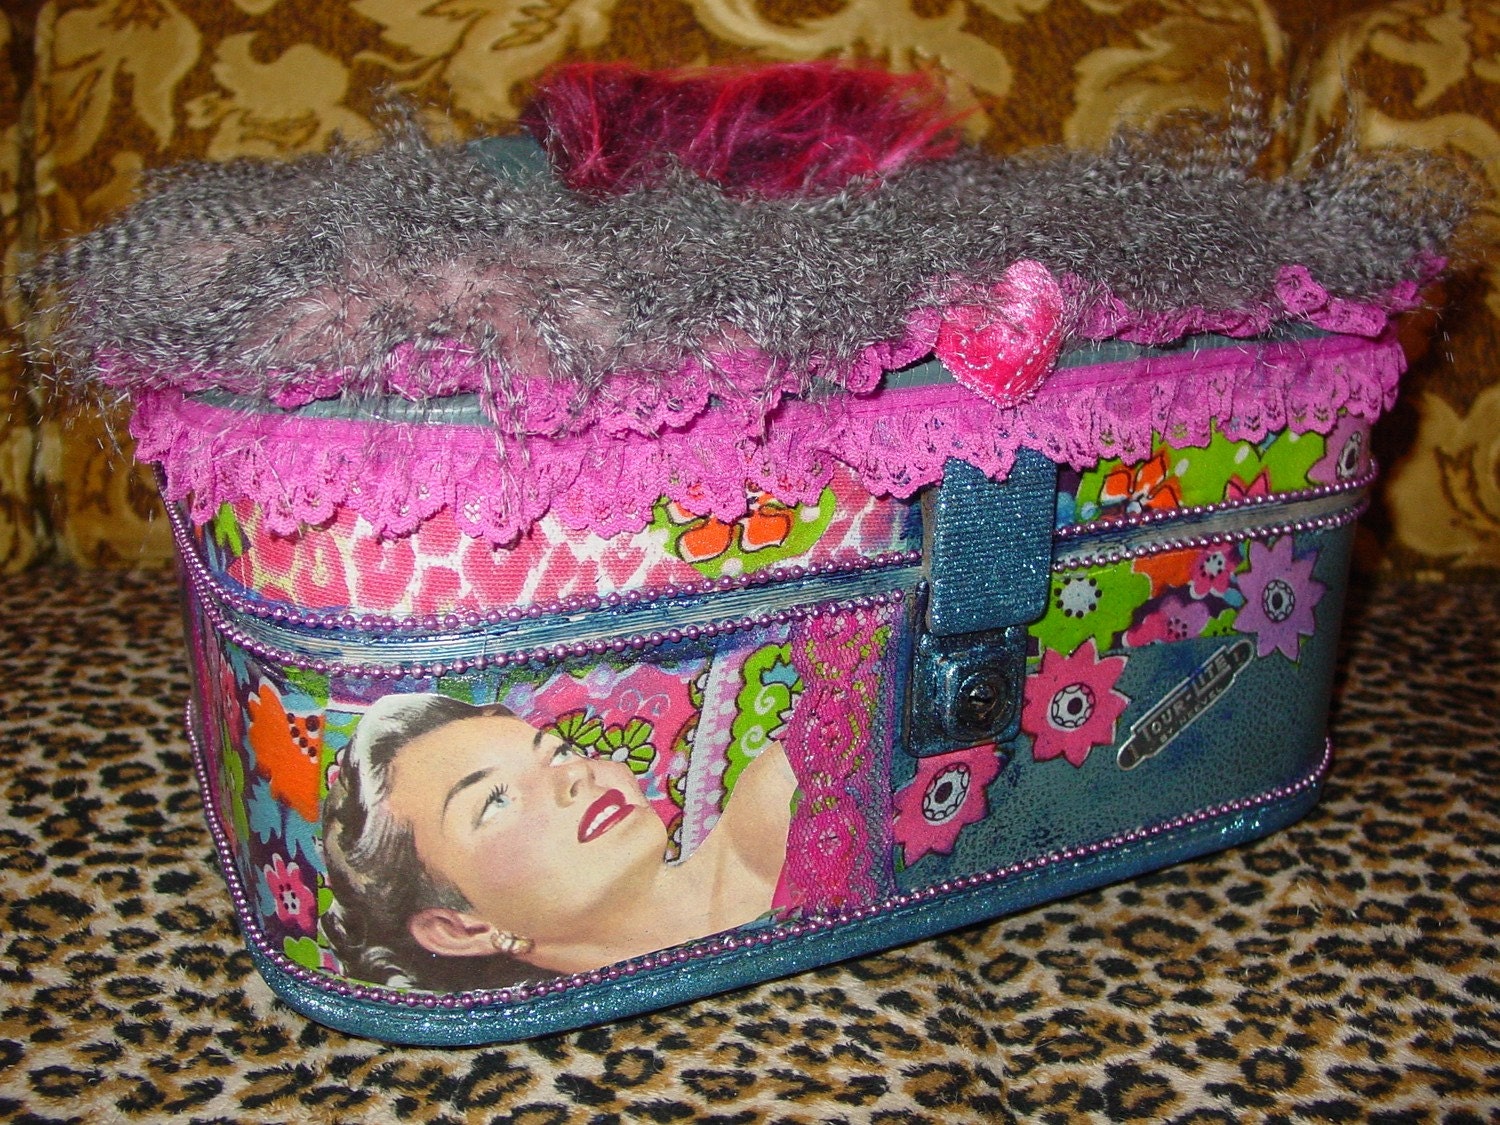 FUNKY recycled   groovy retro 60s style train makeup case  Tour Lite  by Neevel